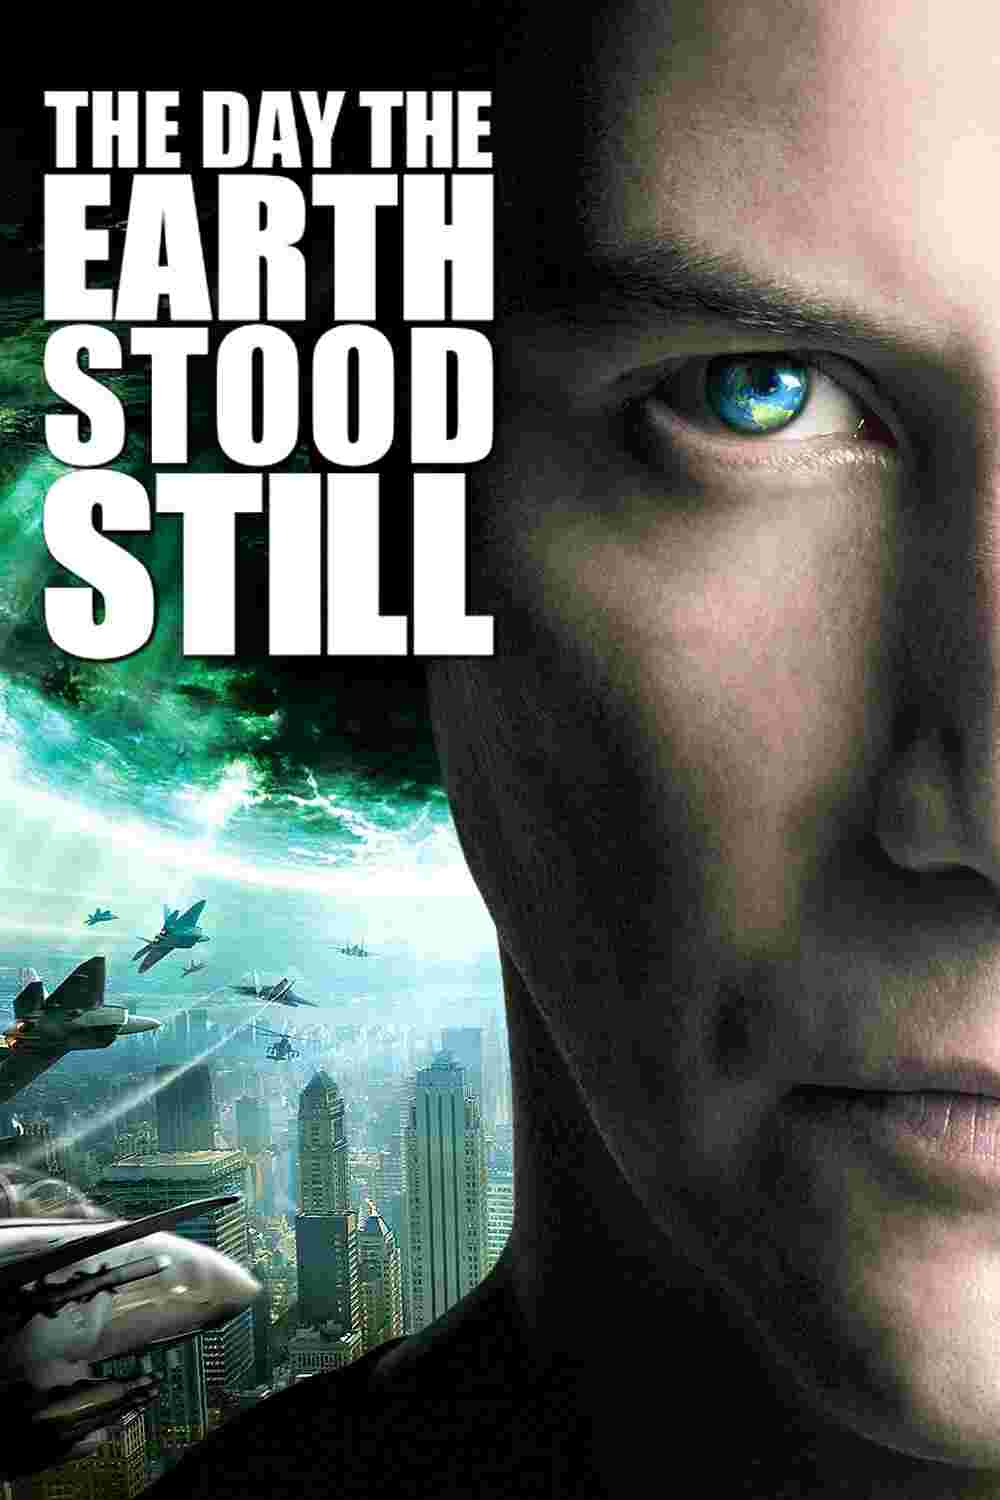 The Day the Earth Stood Still (2008) Keanu Reeves